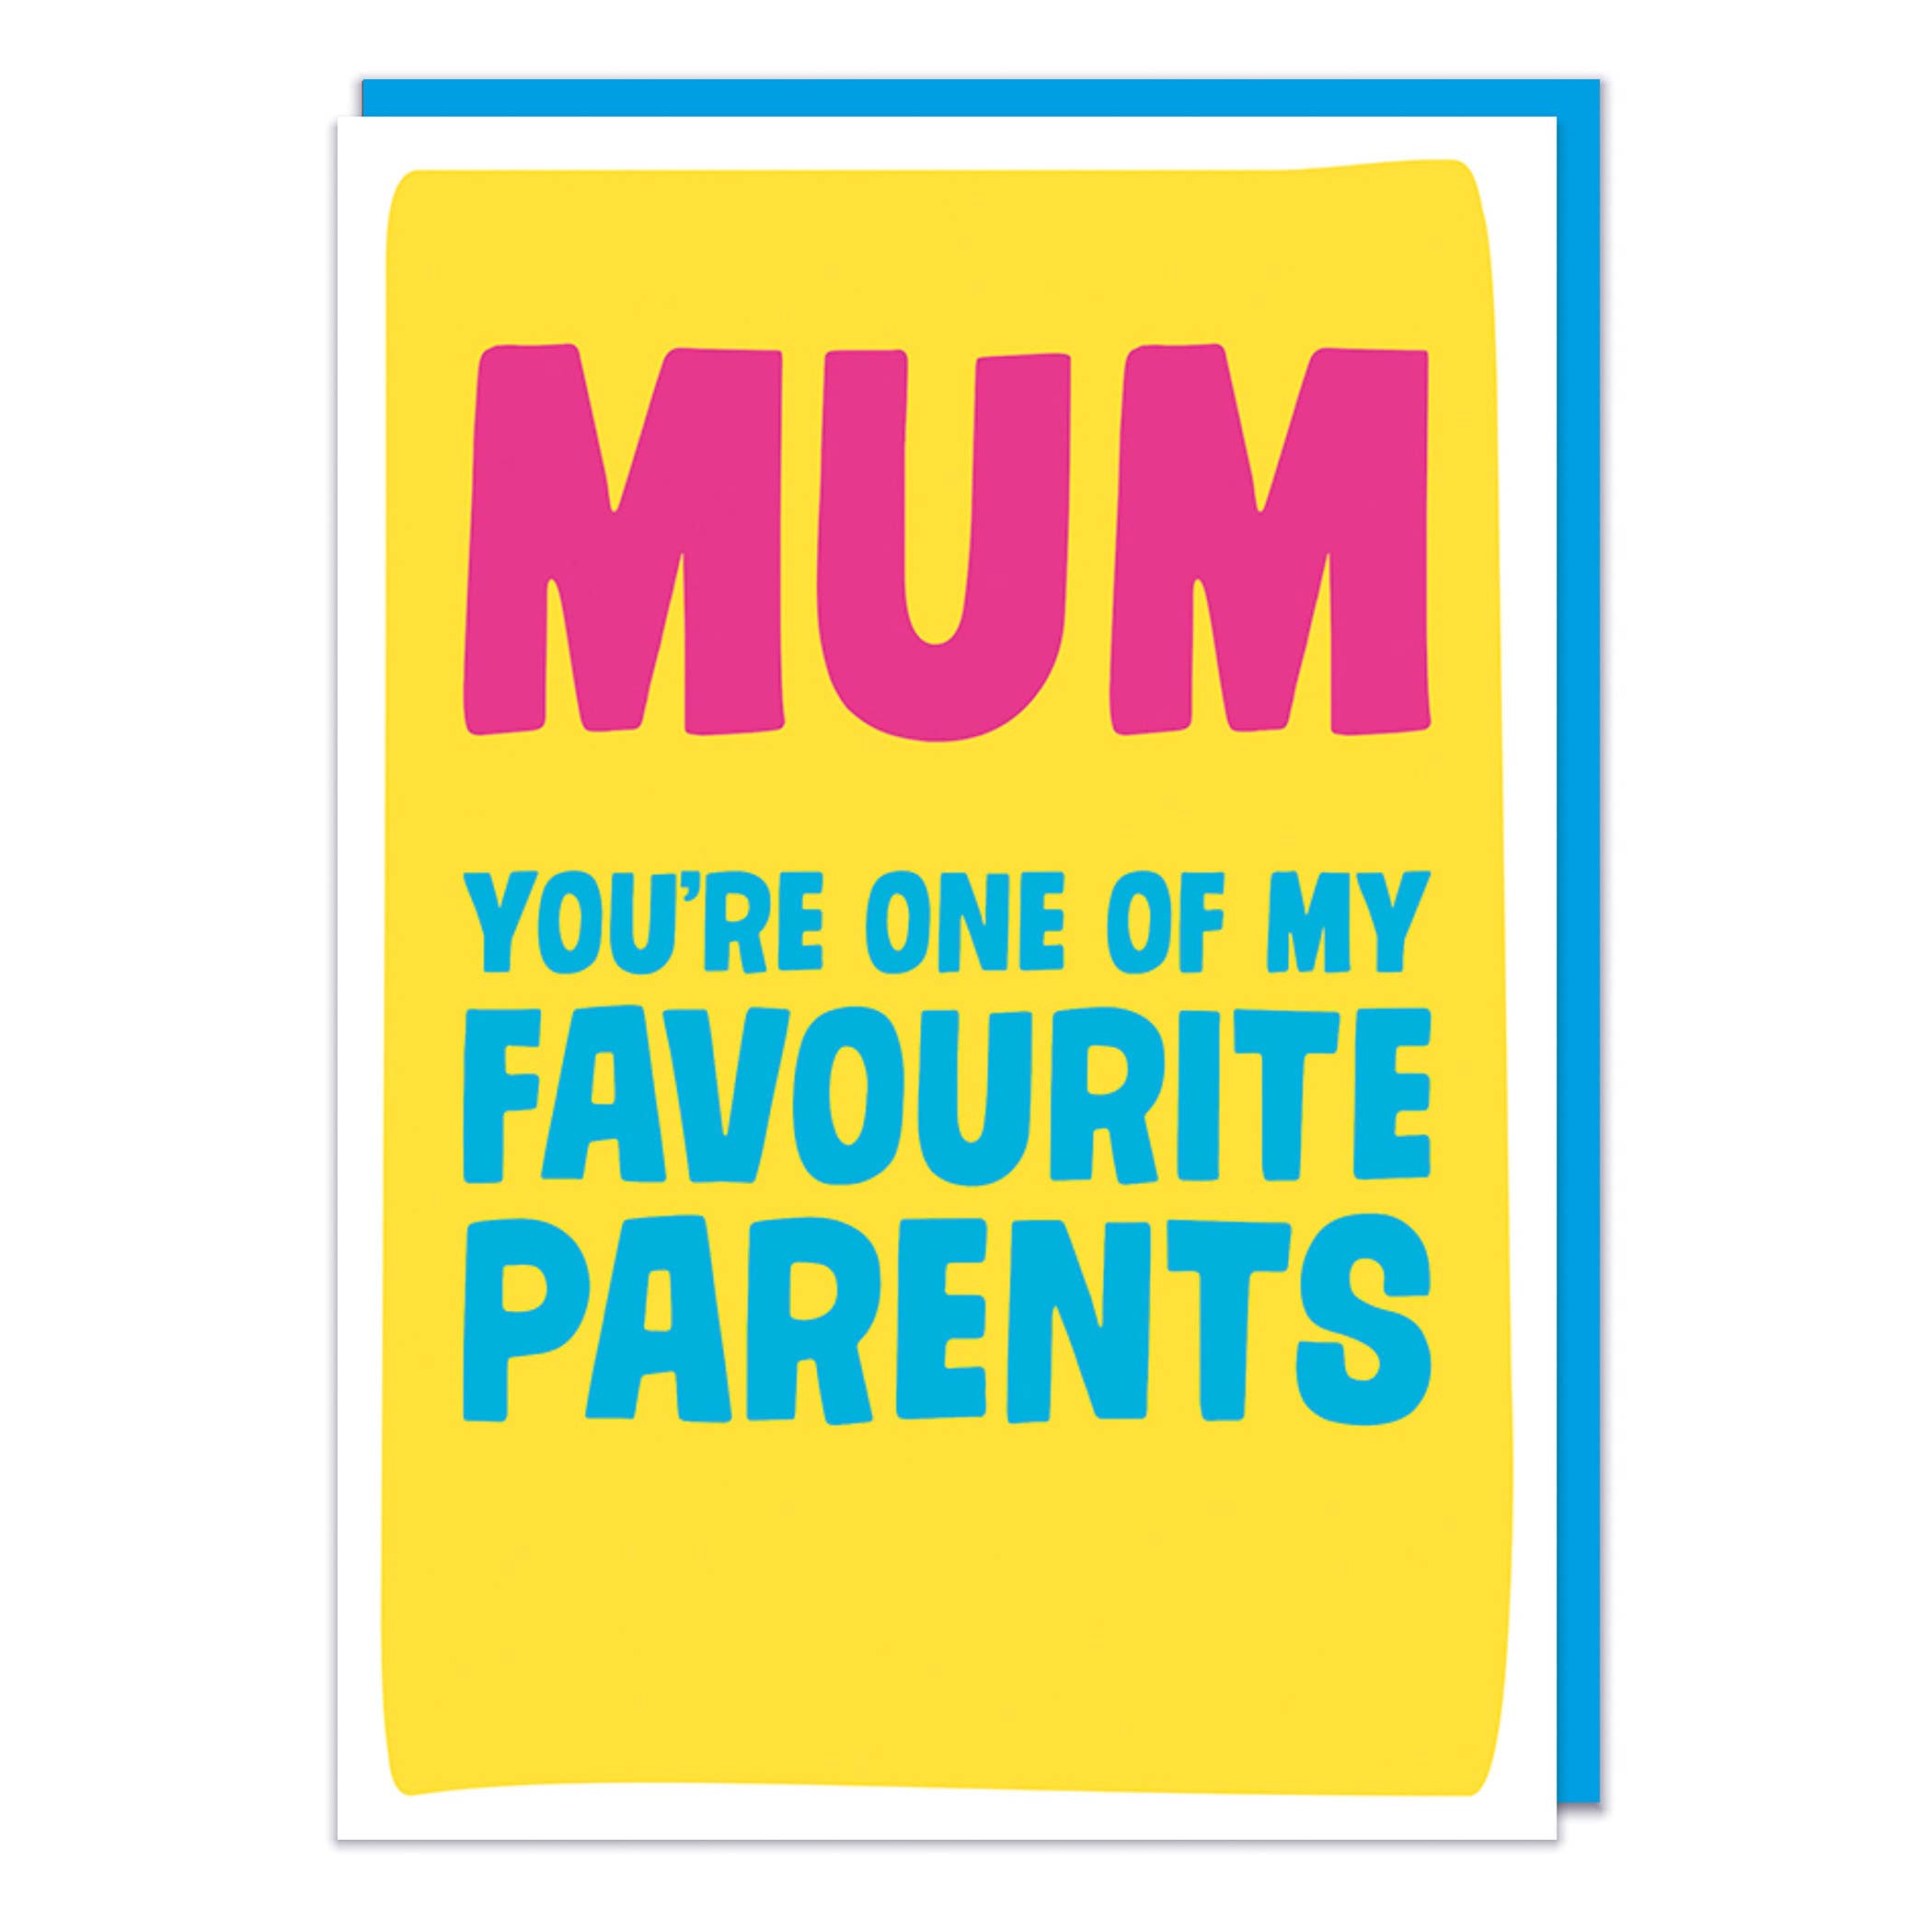 Mum You're One Of My Favourite Parents by Dean Morris